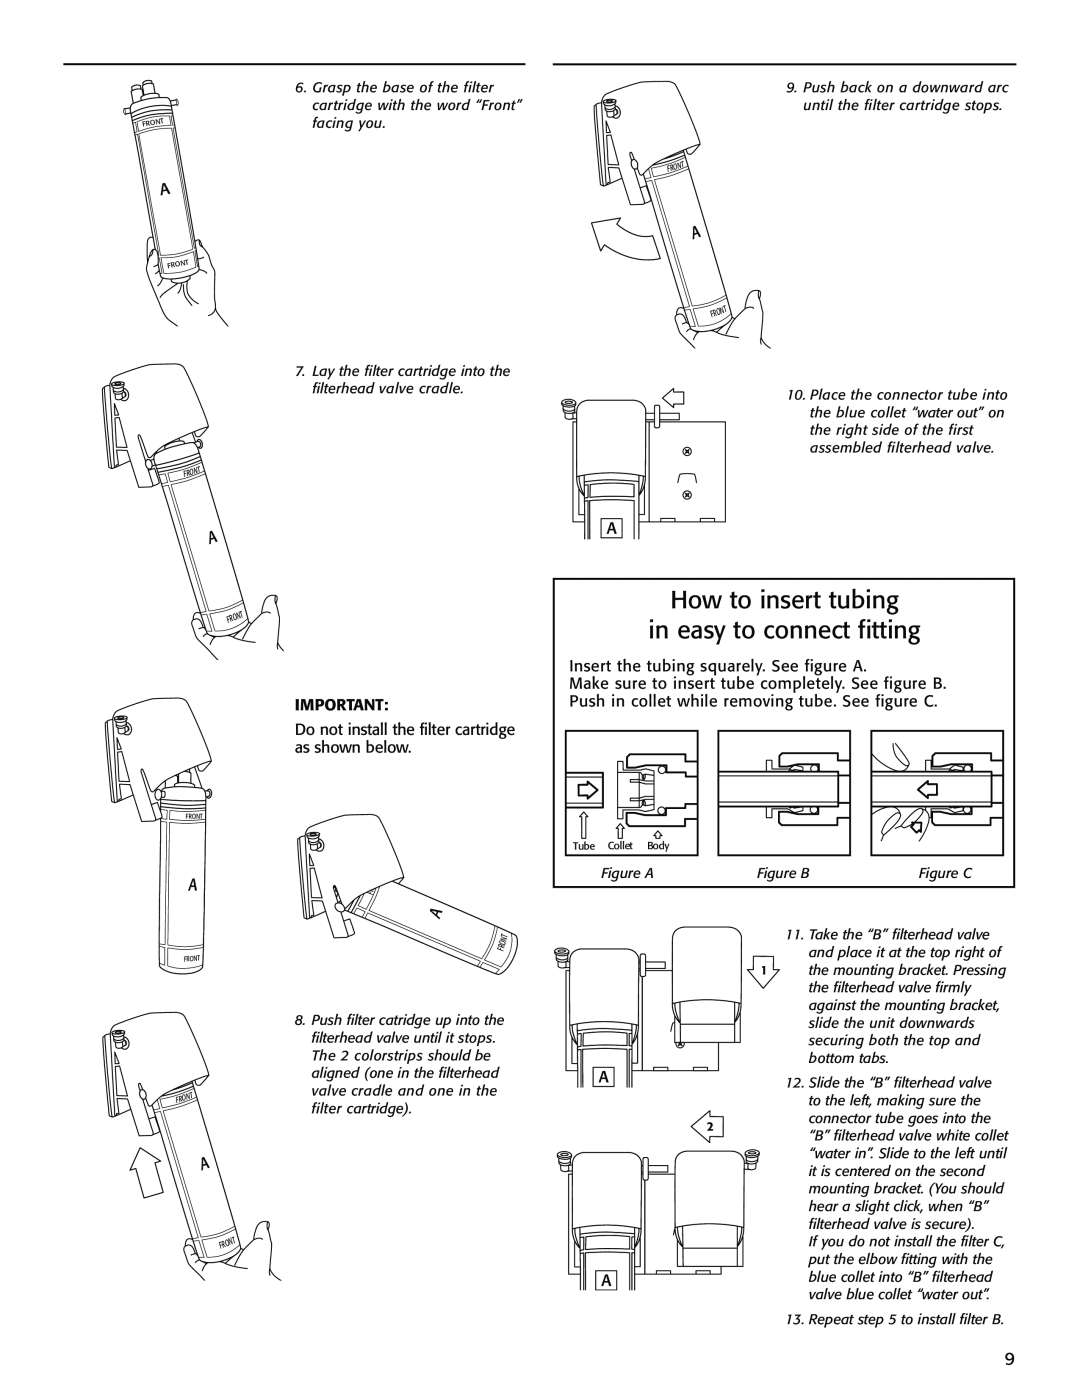 Whirlpool WHAF-0335AB, WHAB-6015 How to insert tubing in easy to connect fitting, Insert the tubing squarely. See figure A 